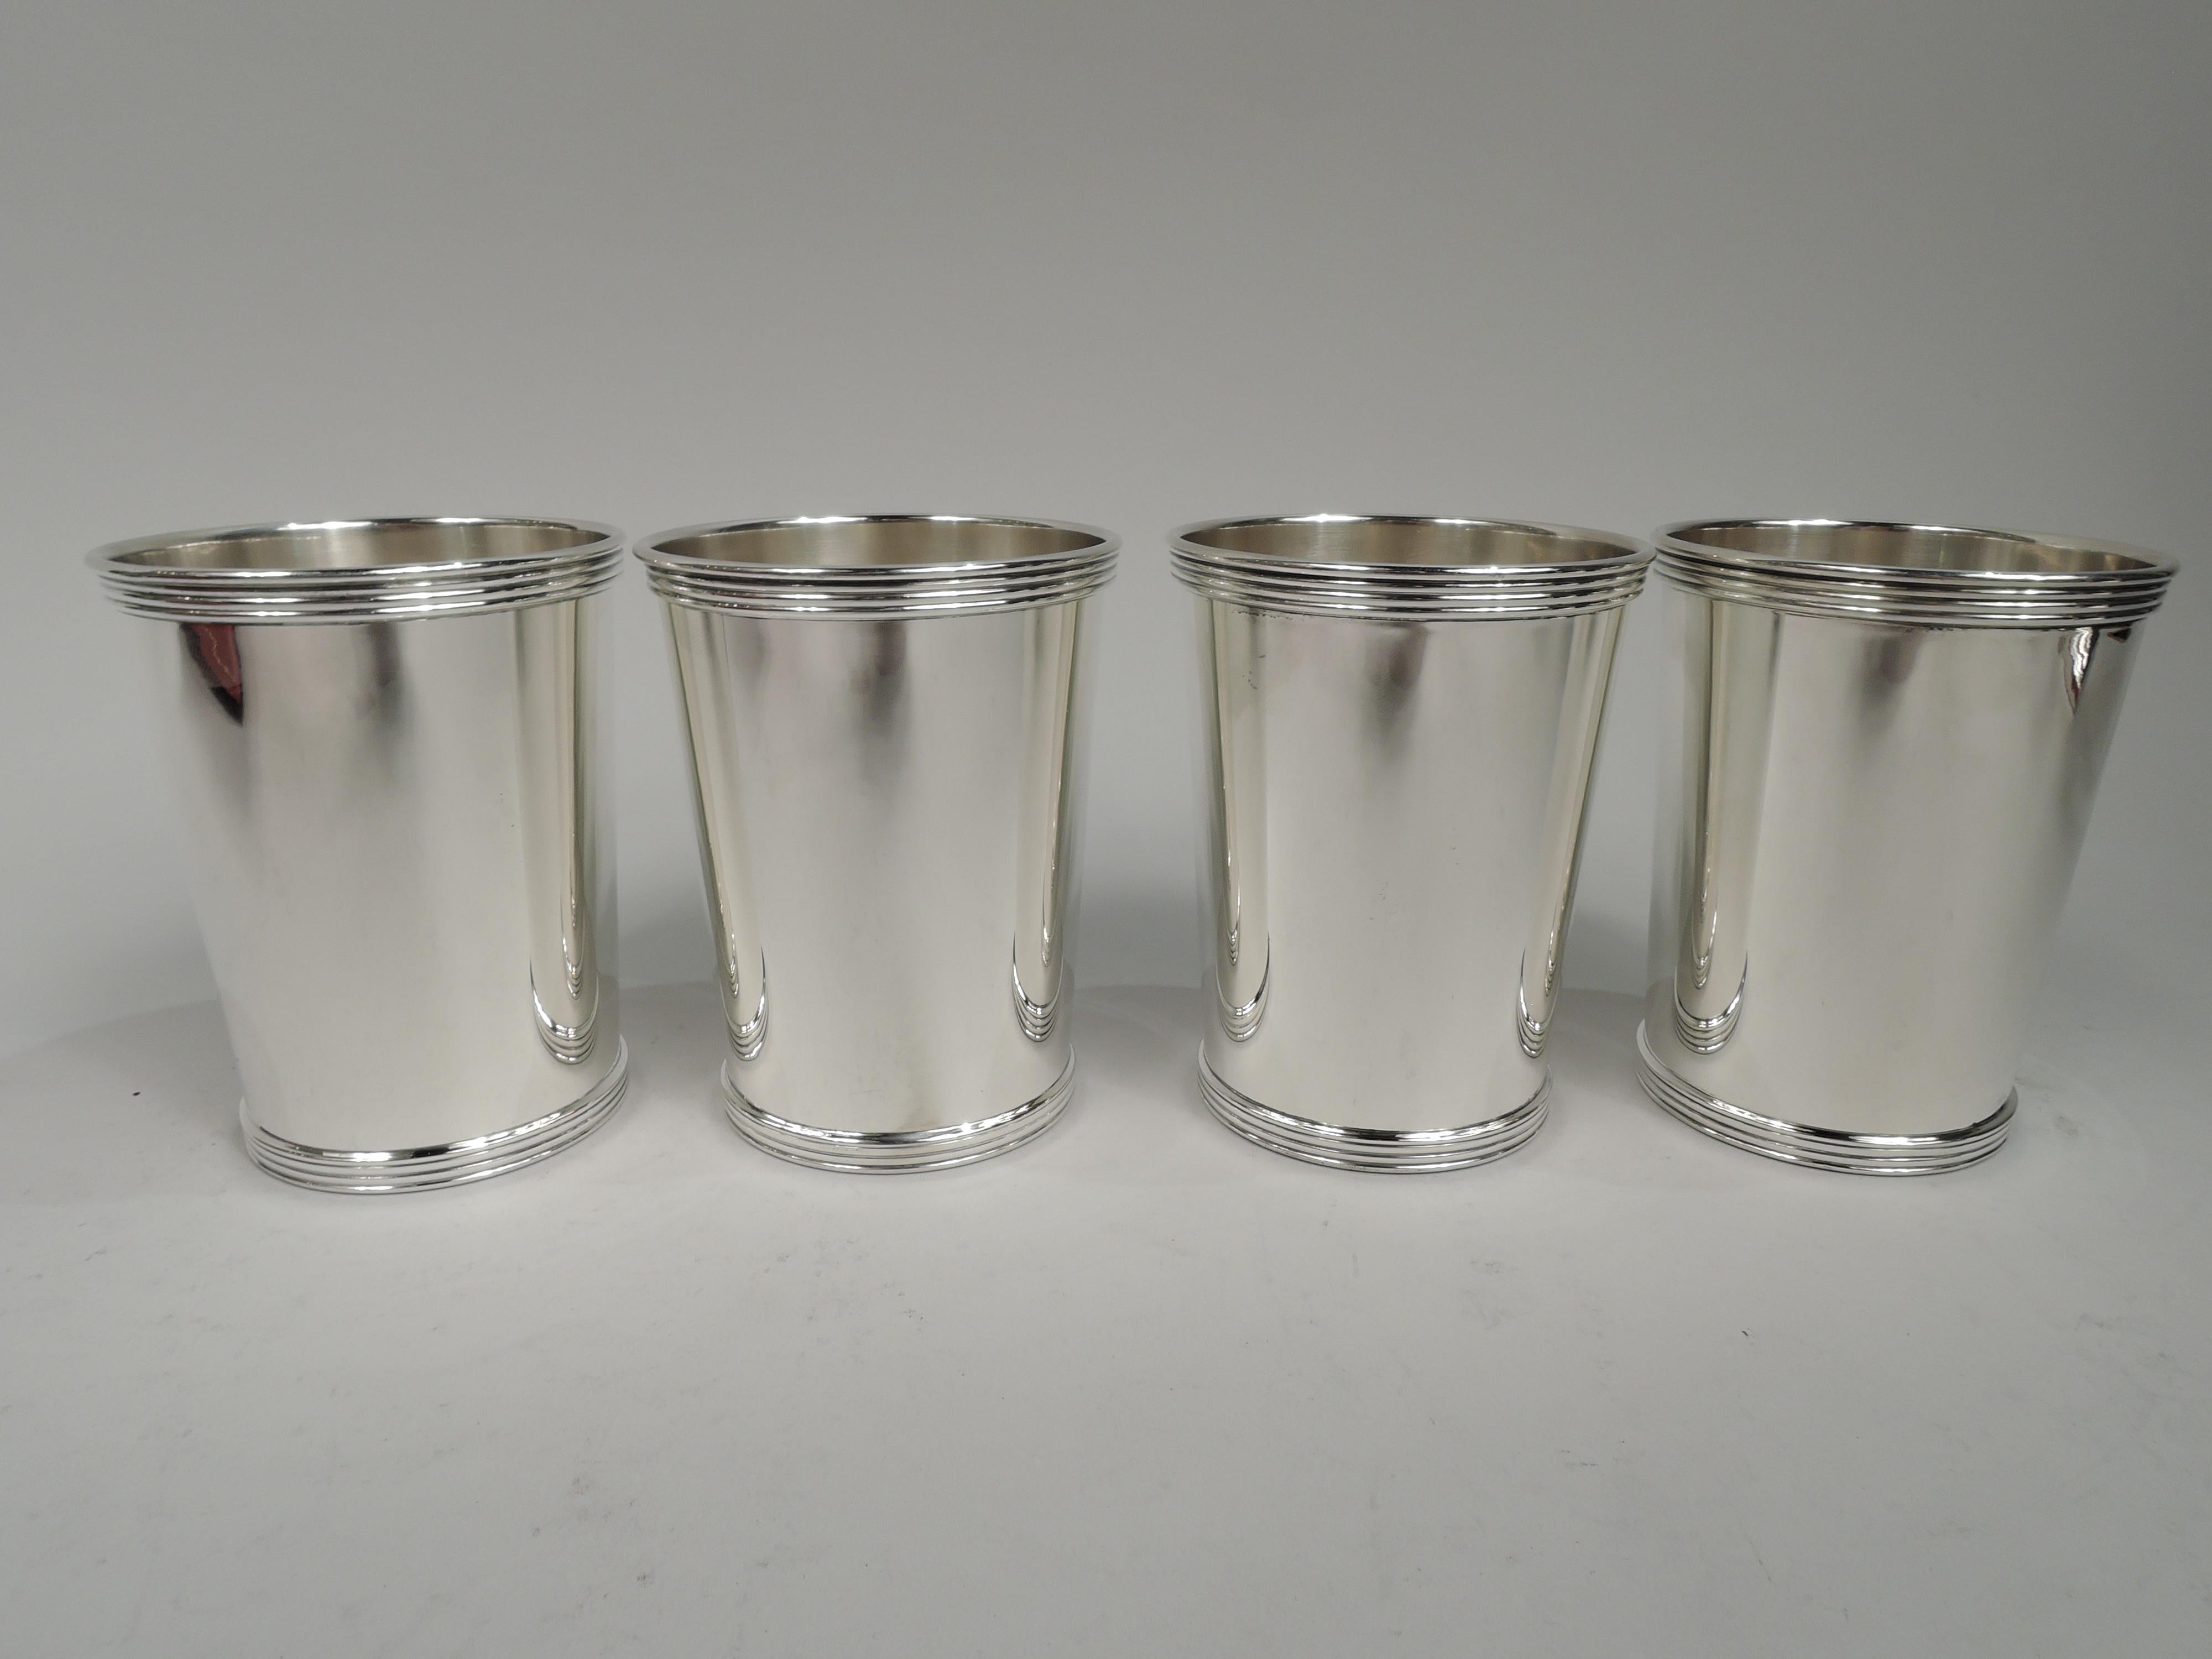 Modern Set of 4 Cartier Sterling Silver Mint Juleps in Leather-Bound Case